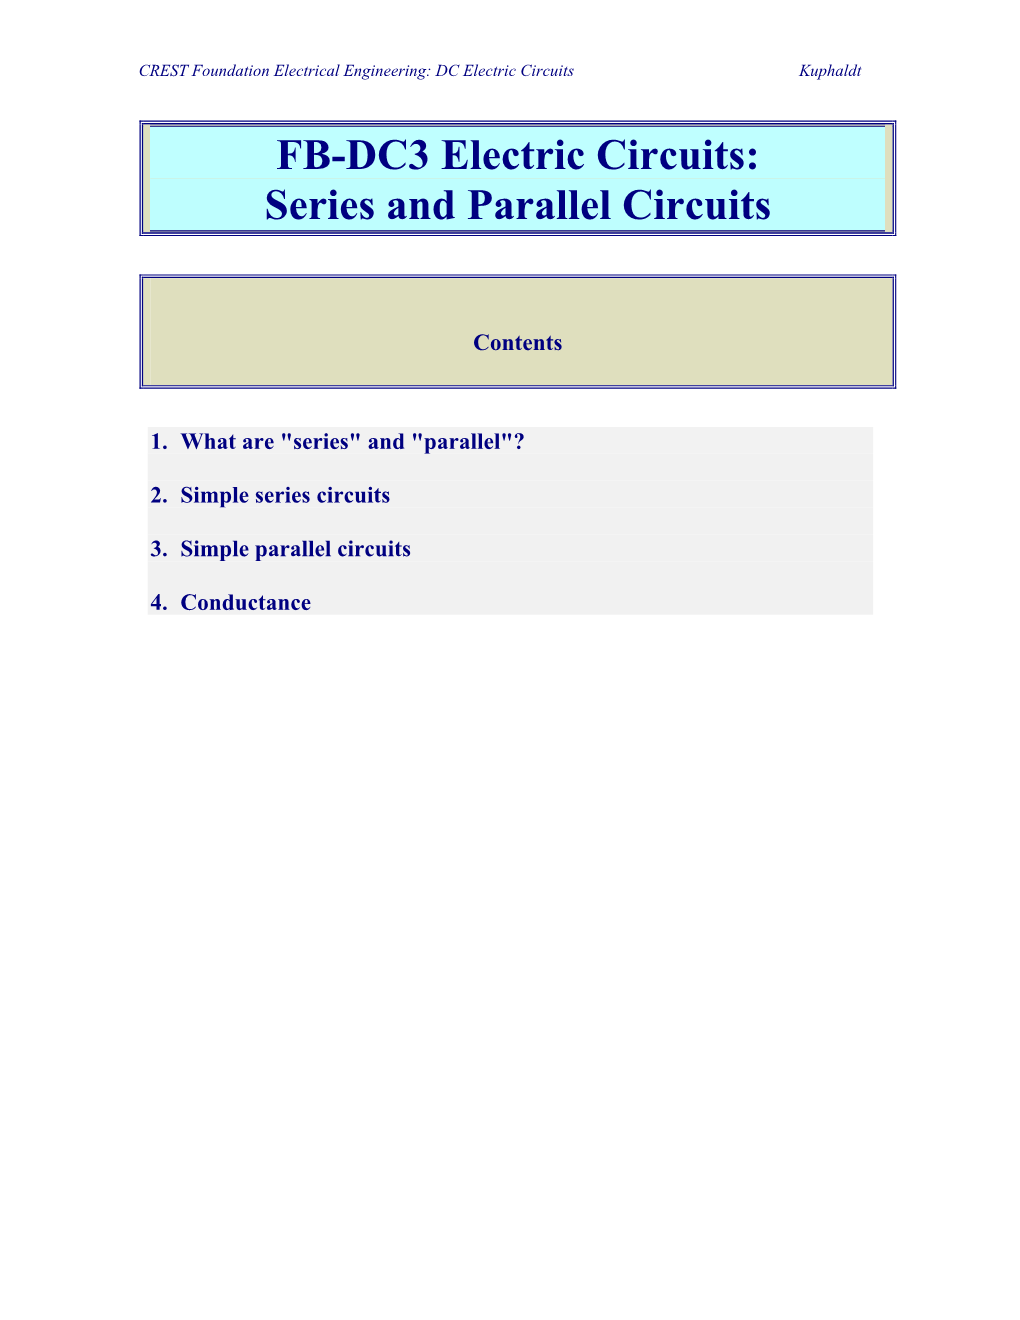 FB-DC3 Electric Circuits: Series and Parallel Circuits